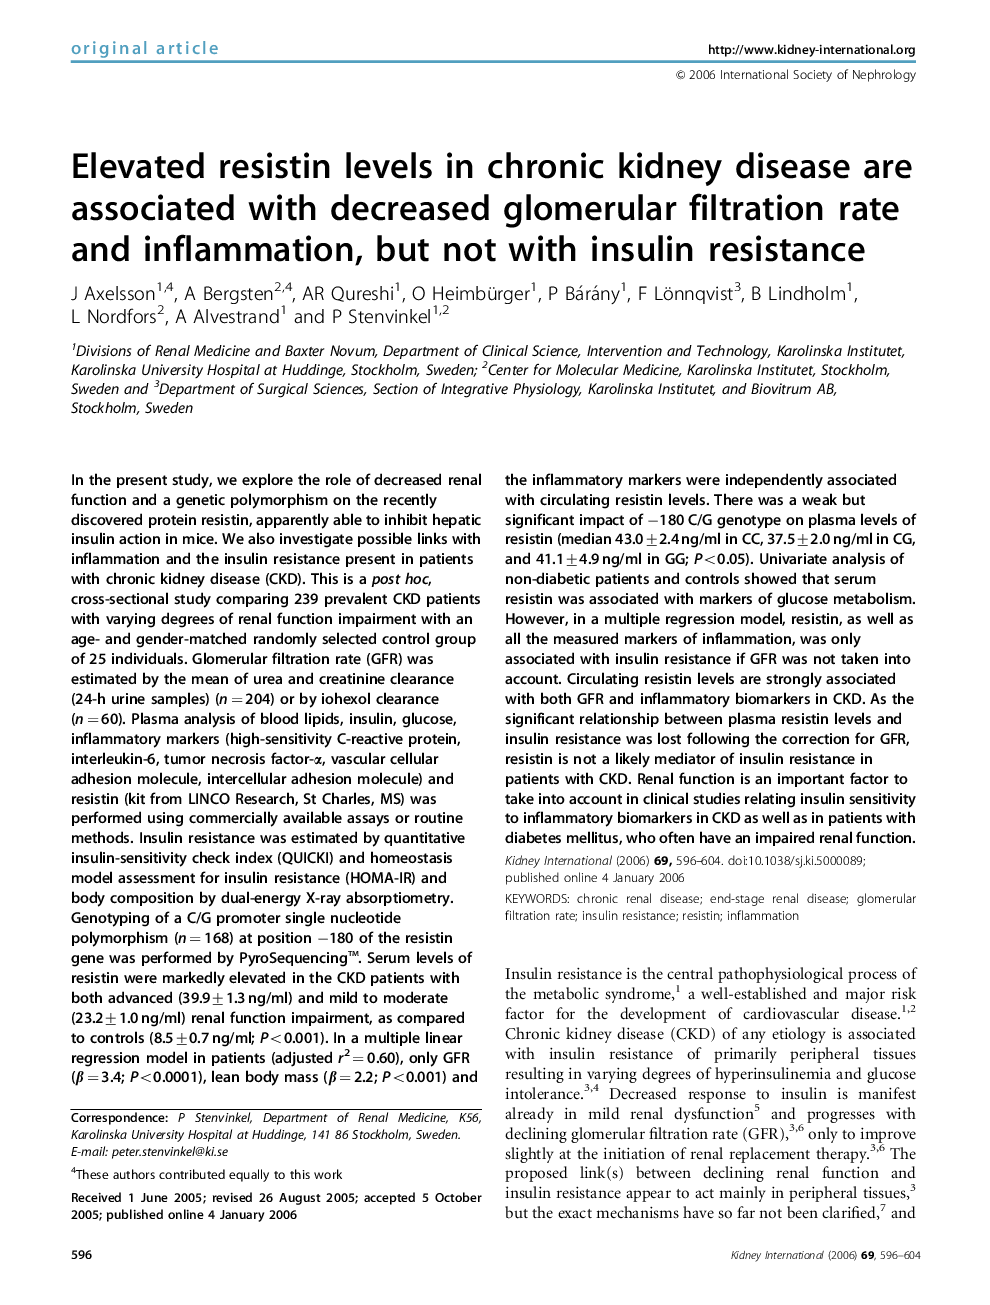 Elevated resistin levels in chronic kidney disease are associated with decreased glomerular filtration rate and inflammation, but not with insulin resistance